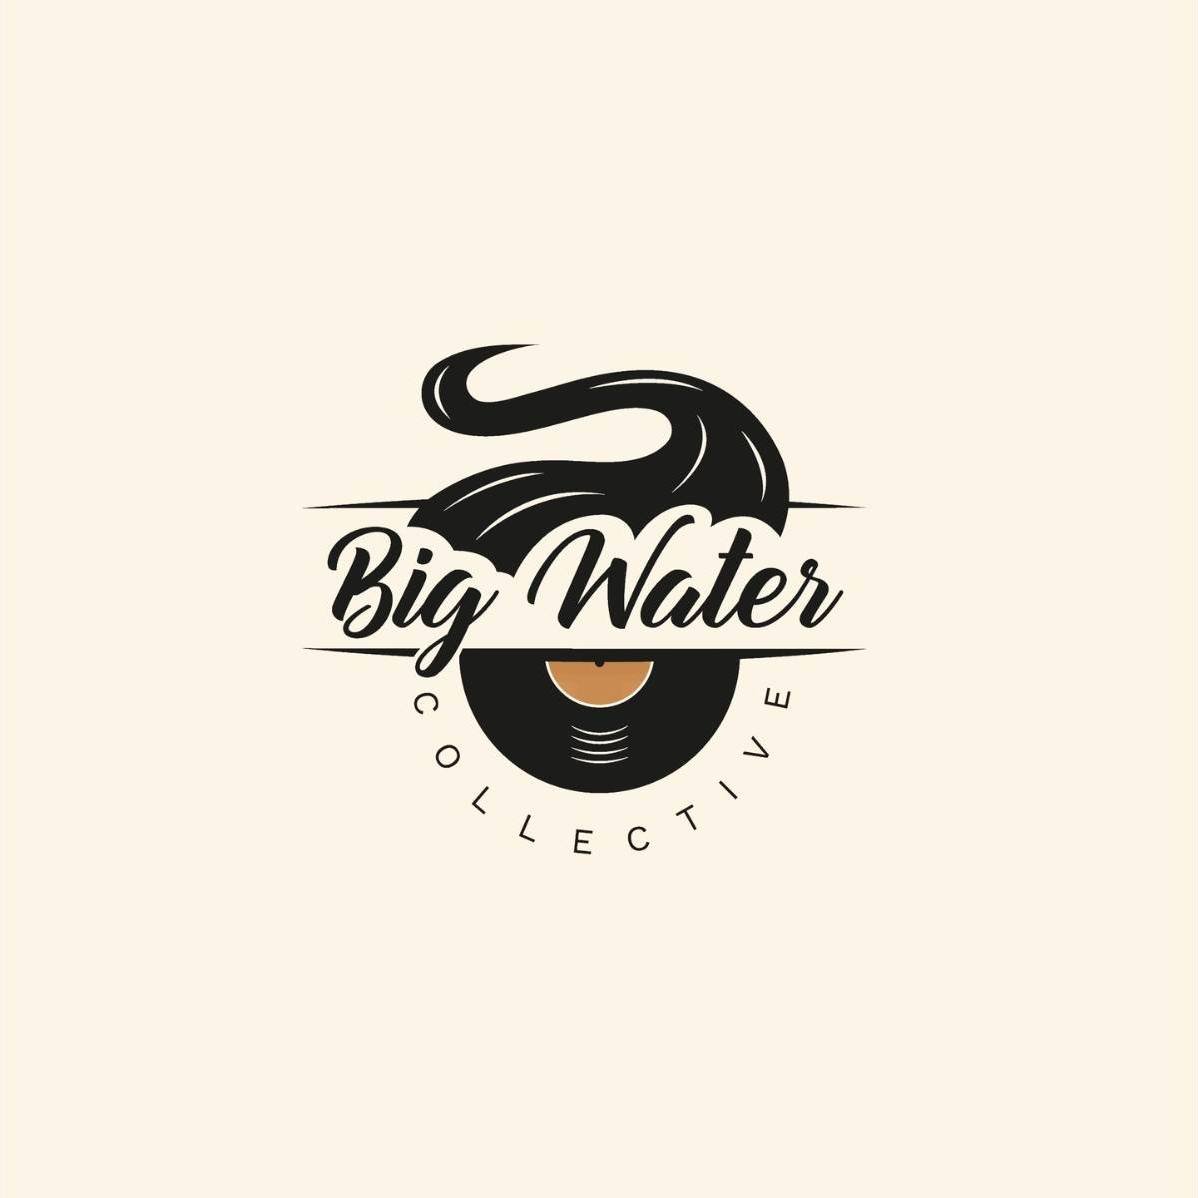 Stoked to be partnering with @bigwatercollective for tonight's show! If you aren't familiar with them, you can find out more (and get some really cool merch) tonight at @haystackcoffee, 6-7:30pm! See you there!